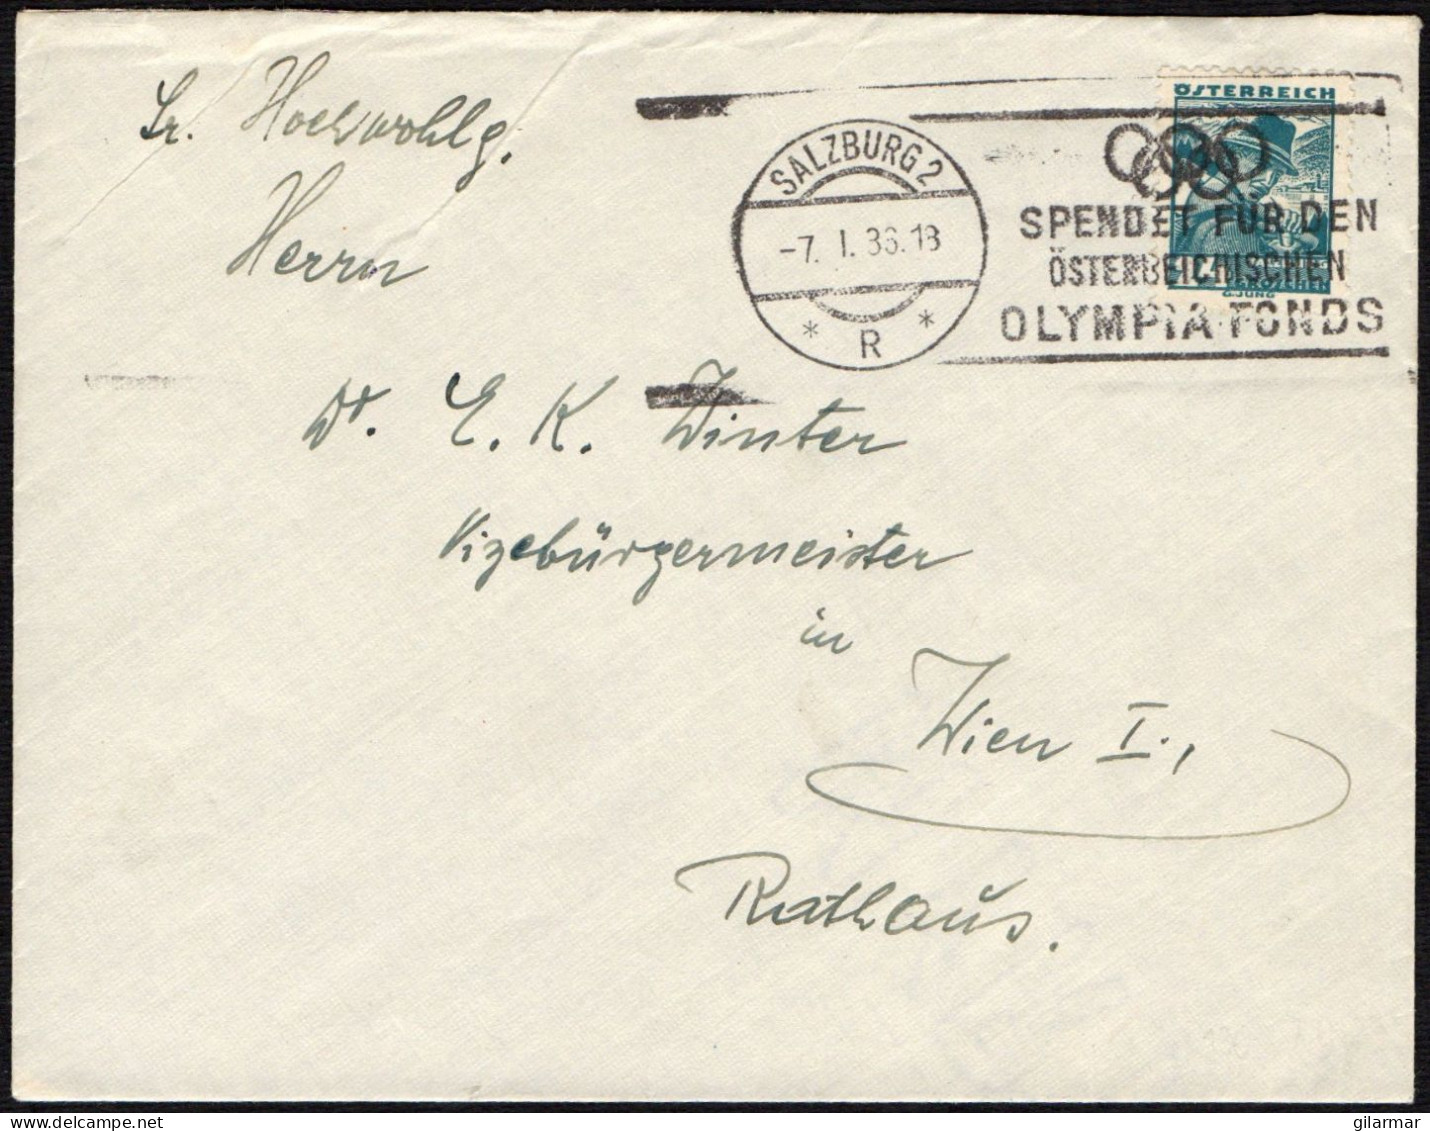 OLYMPIC GAMES 1936 - AUSTRIA SALZBURG 1936 - DONATE TO THE AUSTRIAN OLYMPIC FUND - MAILED ENVELOPE - M - Verano 1936: Berlin